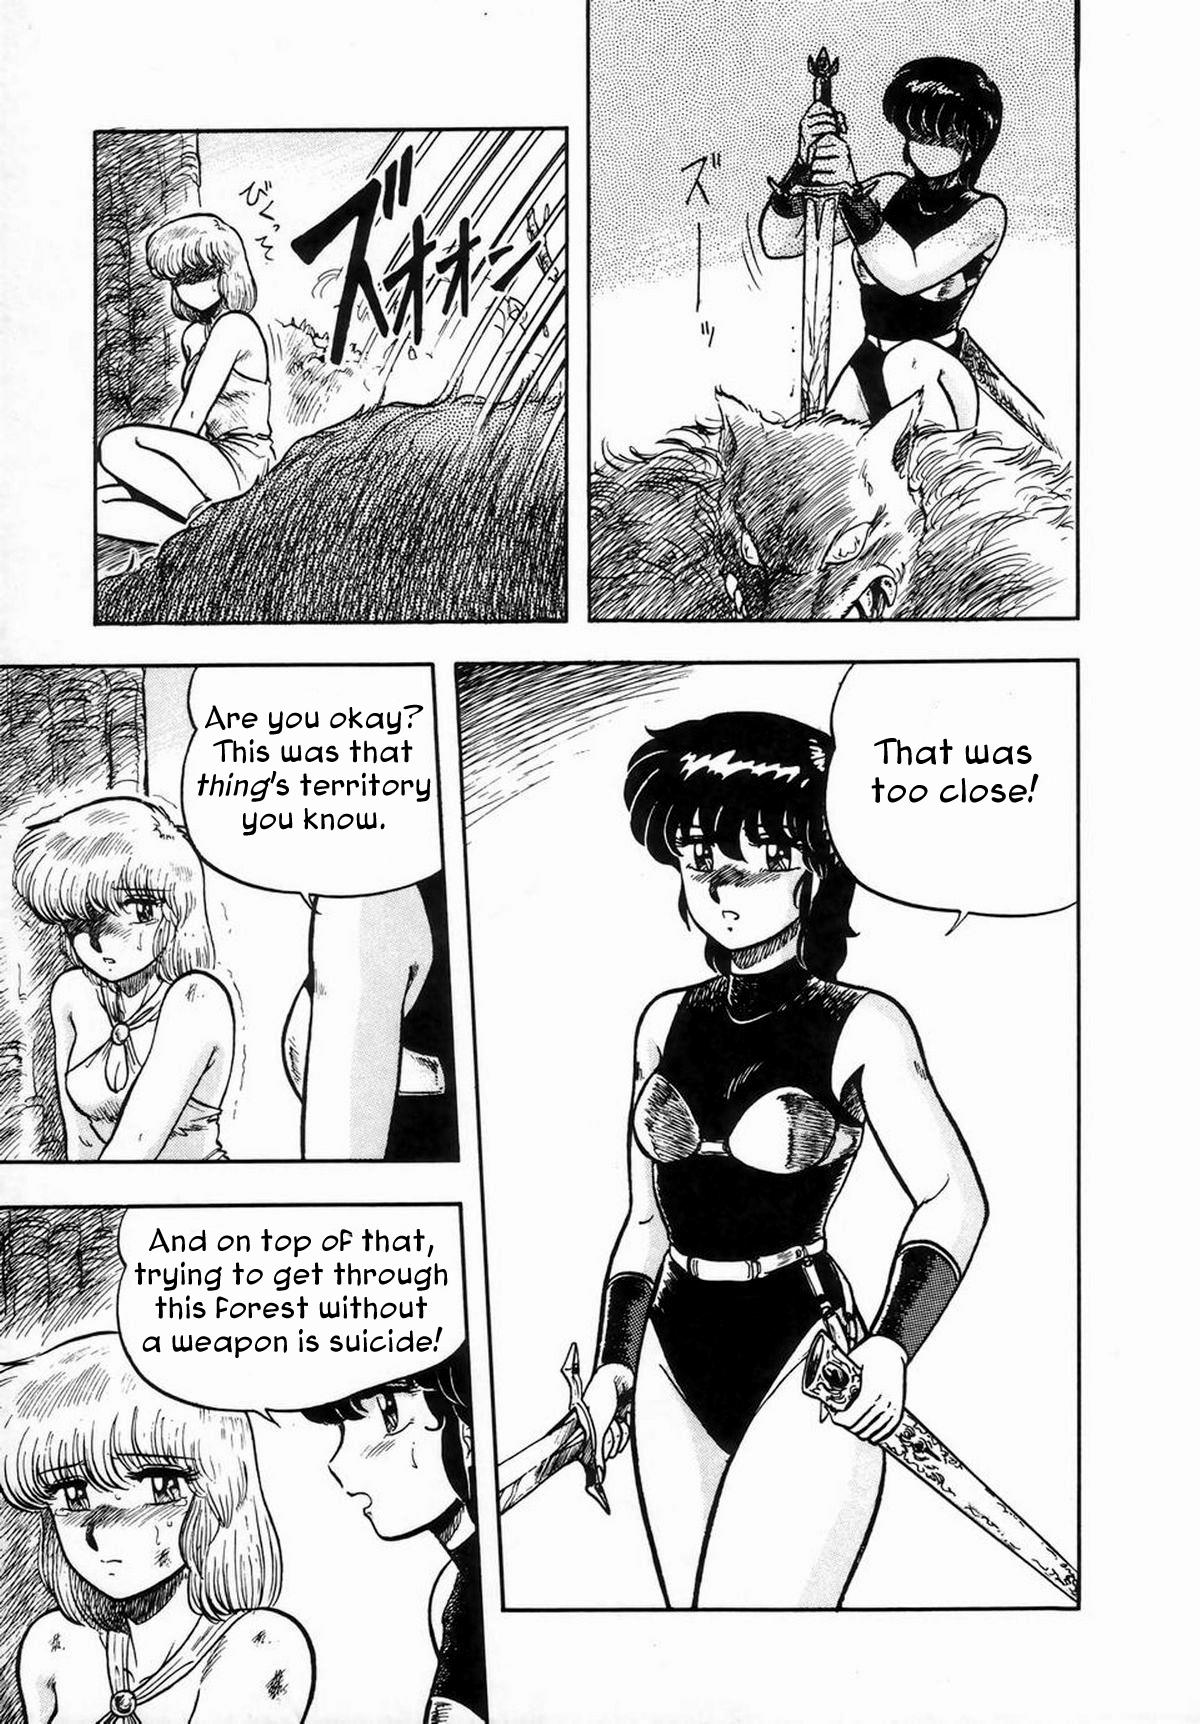 Sylphie Page 5 Of 21 hentai haven, Sylphie Page 5 Of 21 uncensored hentai, Sylp...